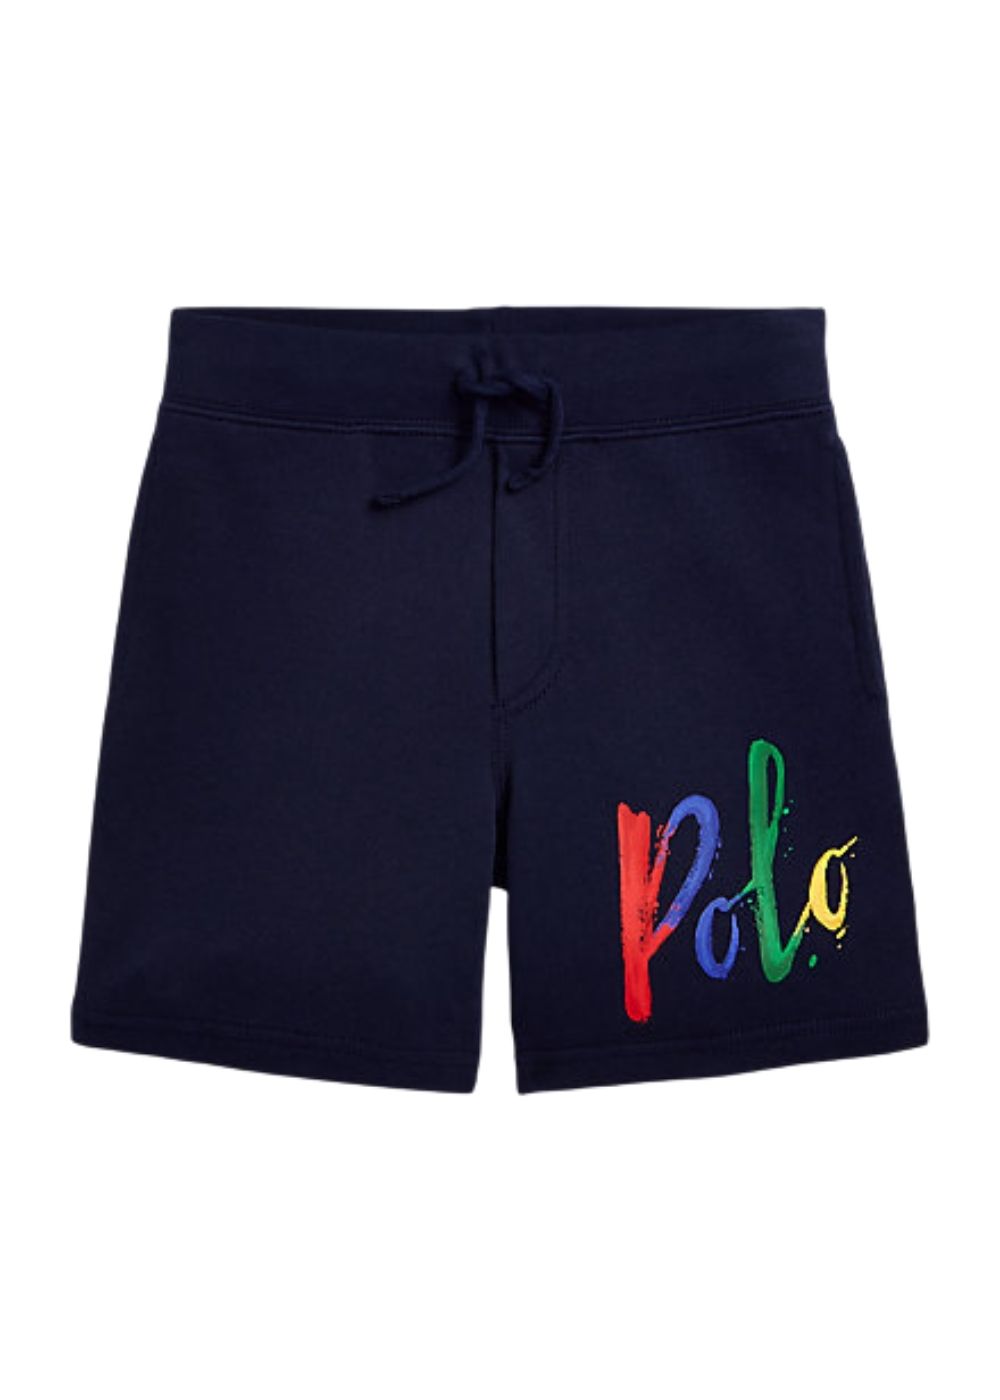 Featured image for “Polo Ralph Lauren Short Logo”